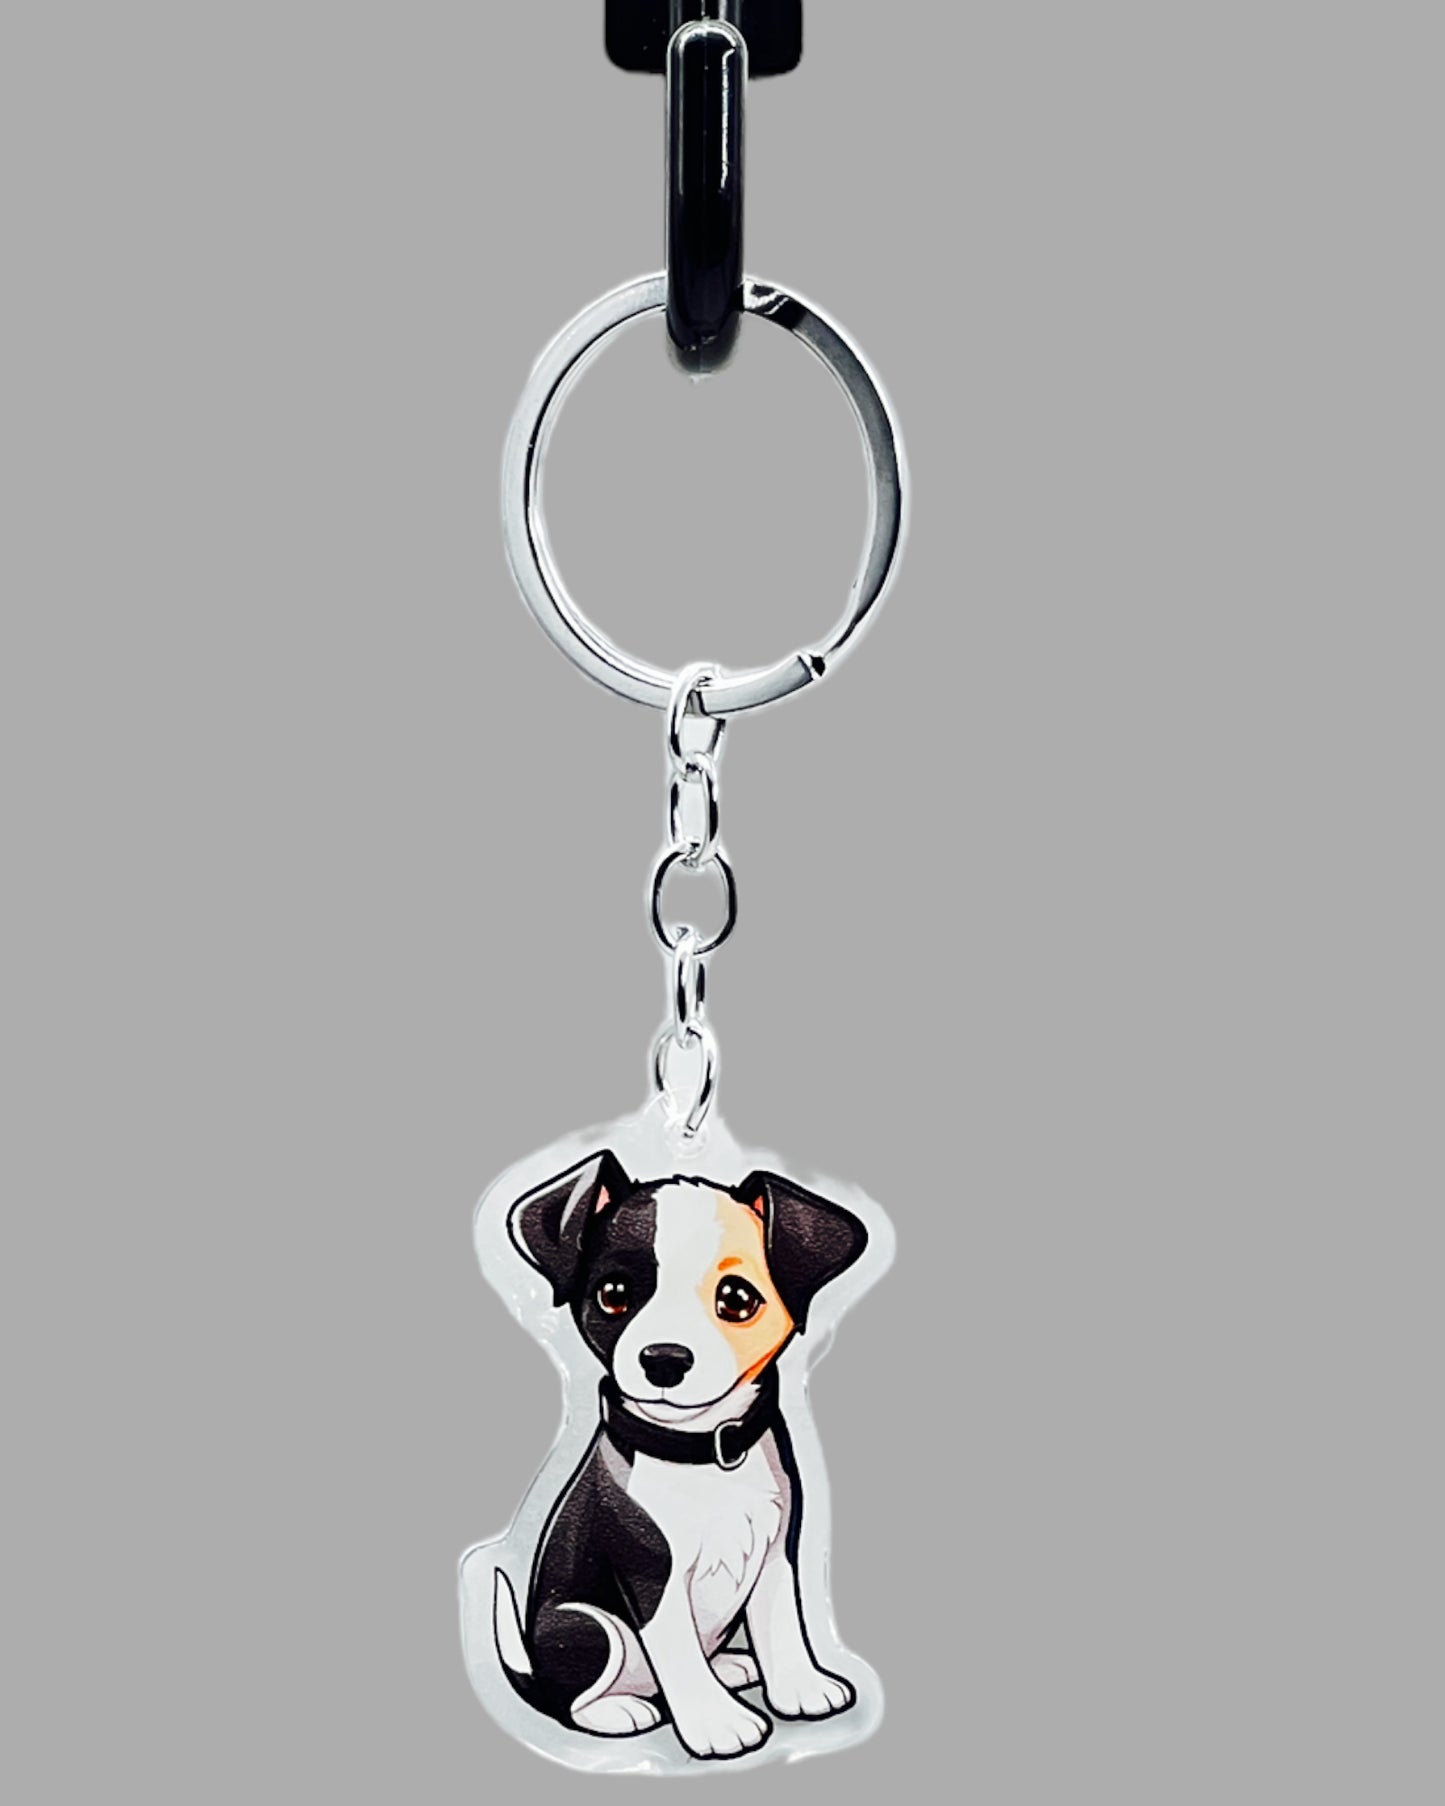 Jack Russell Terrier Dog Acrylic key chain